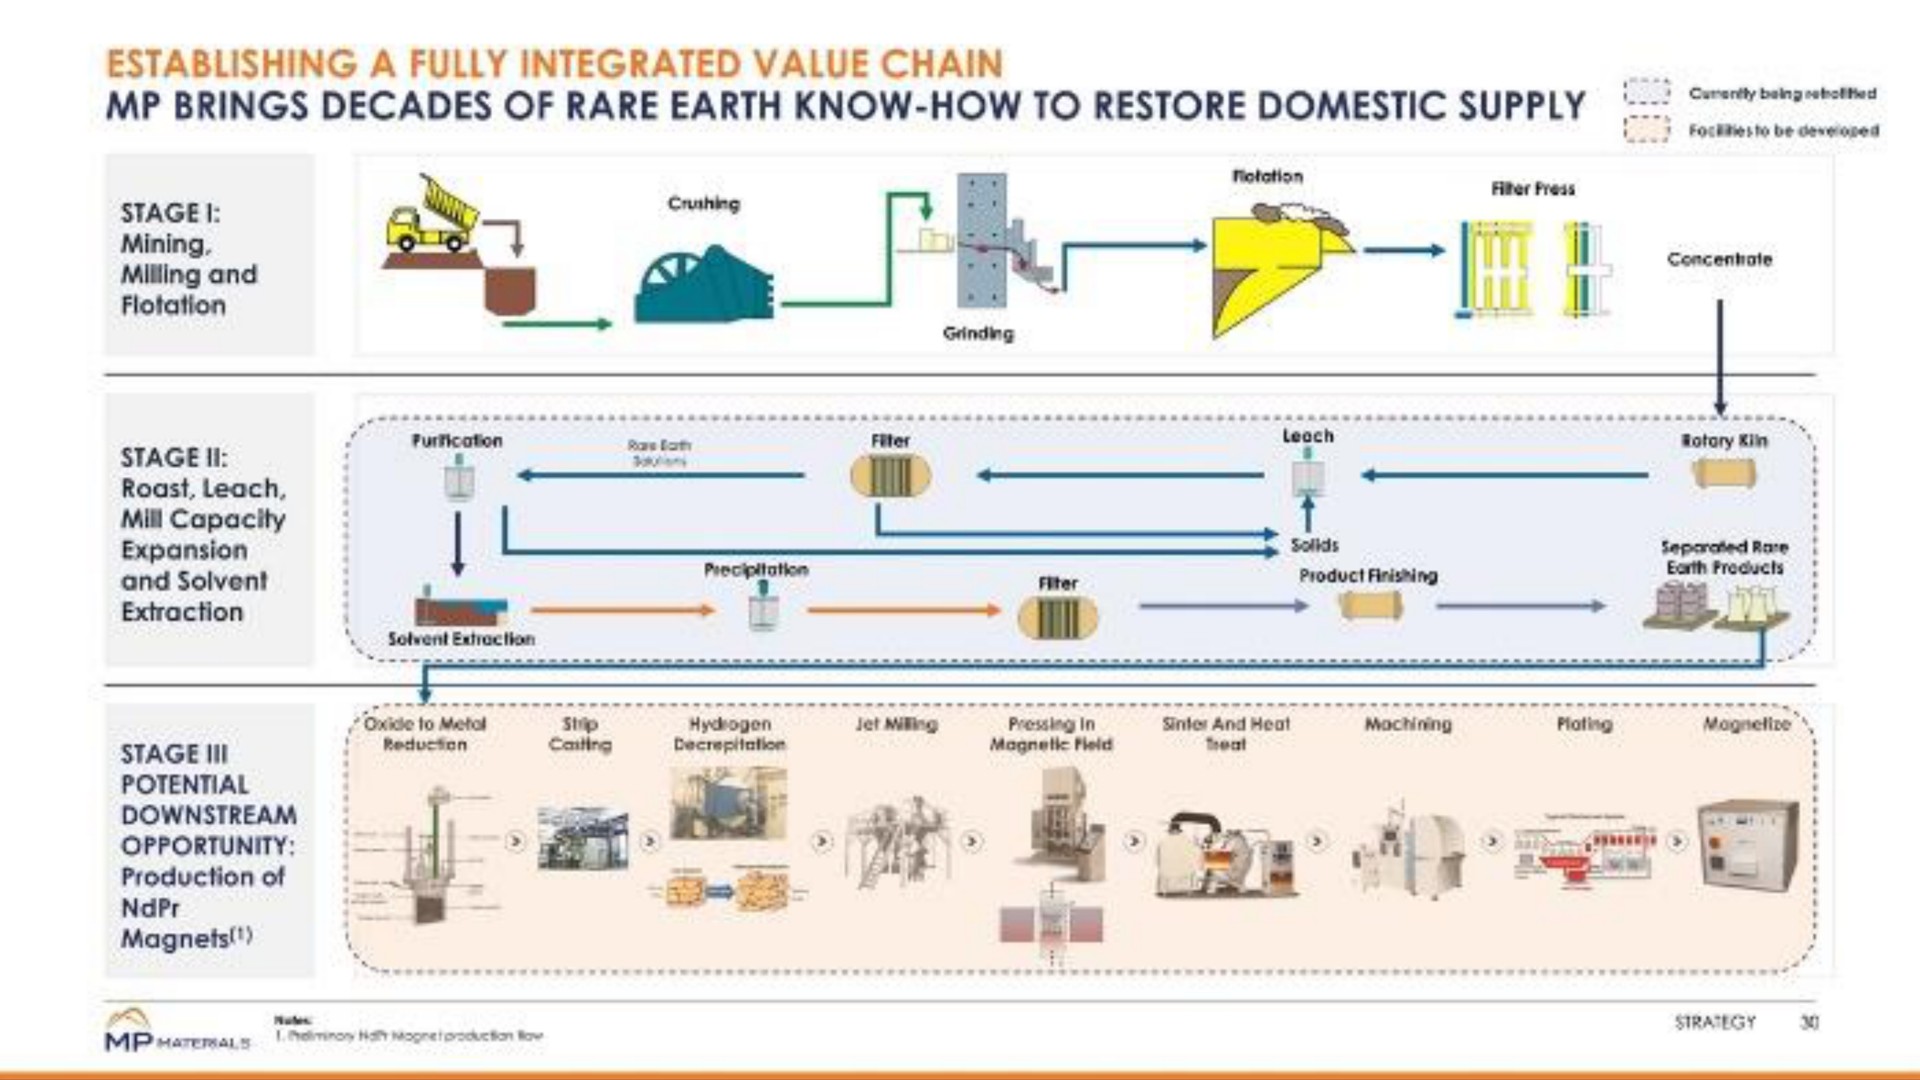 establishing a fully integrated value chain brings decades of rare earth know how to restore domestic supply see eats concerto stage mining milling and downstream opportunity at a me a | MP Materials